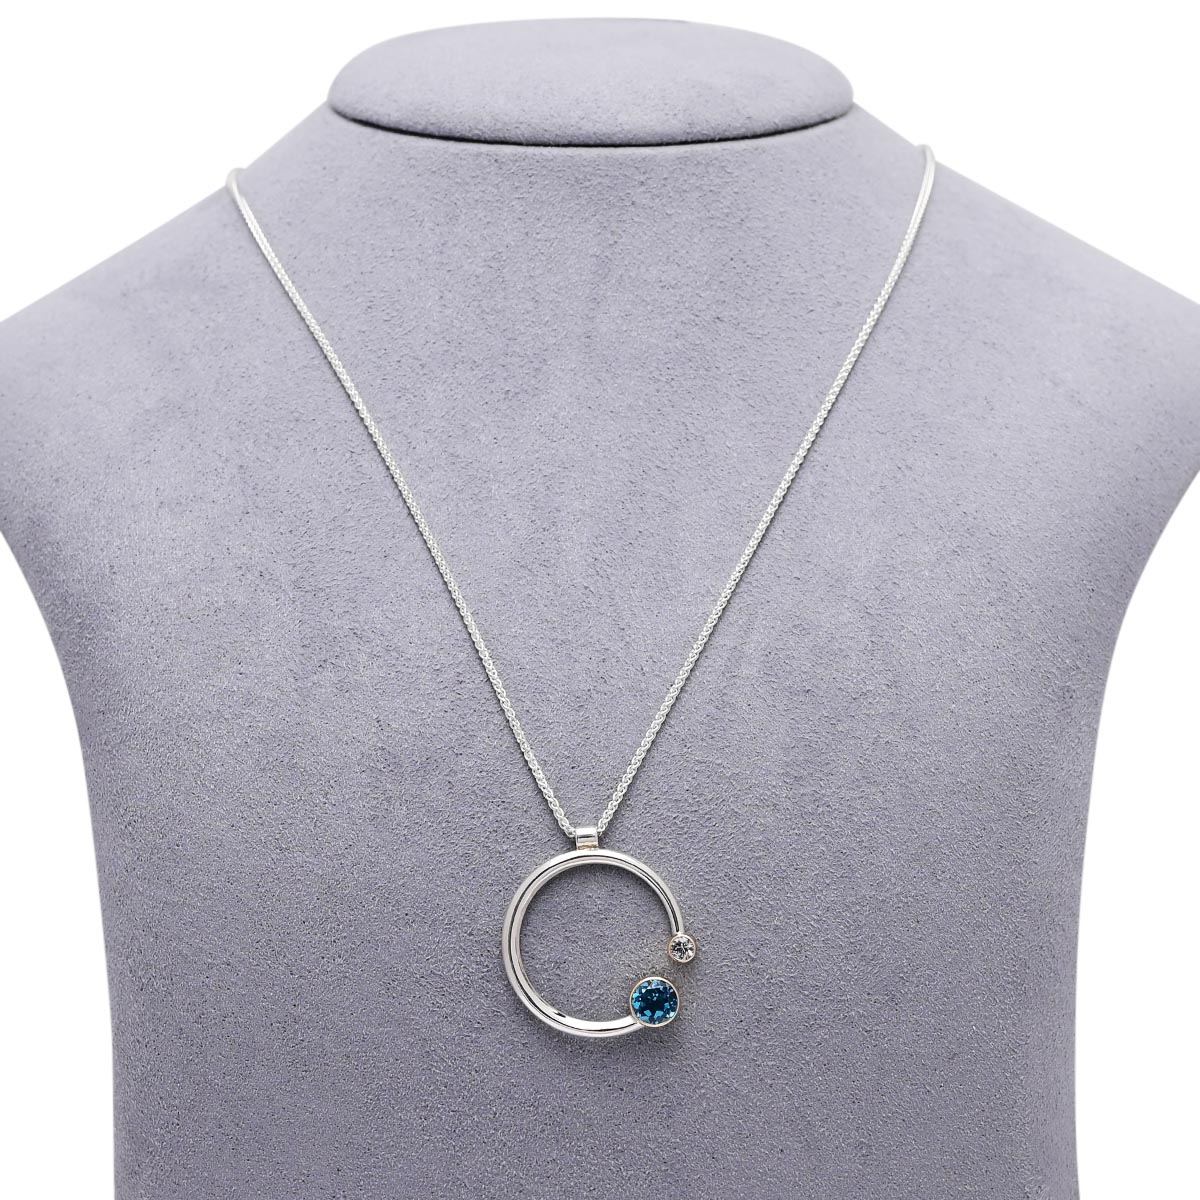 E.L. Designs Blue Topaz Stargazer Necklace in Sterling Silver and 14kt Yellow Gold with White Sapphire